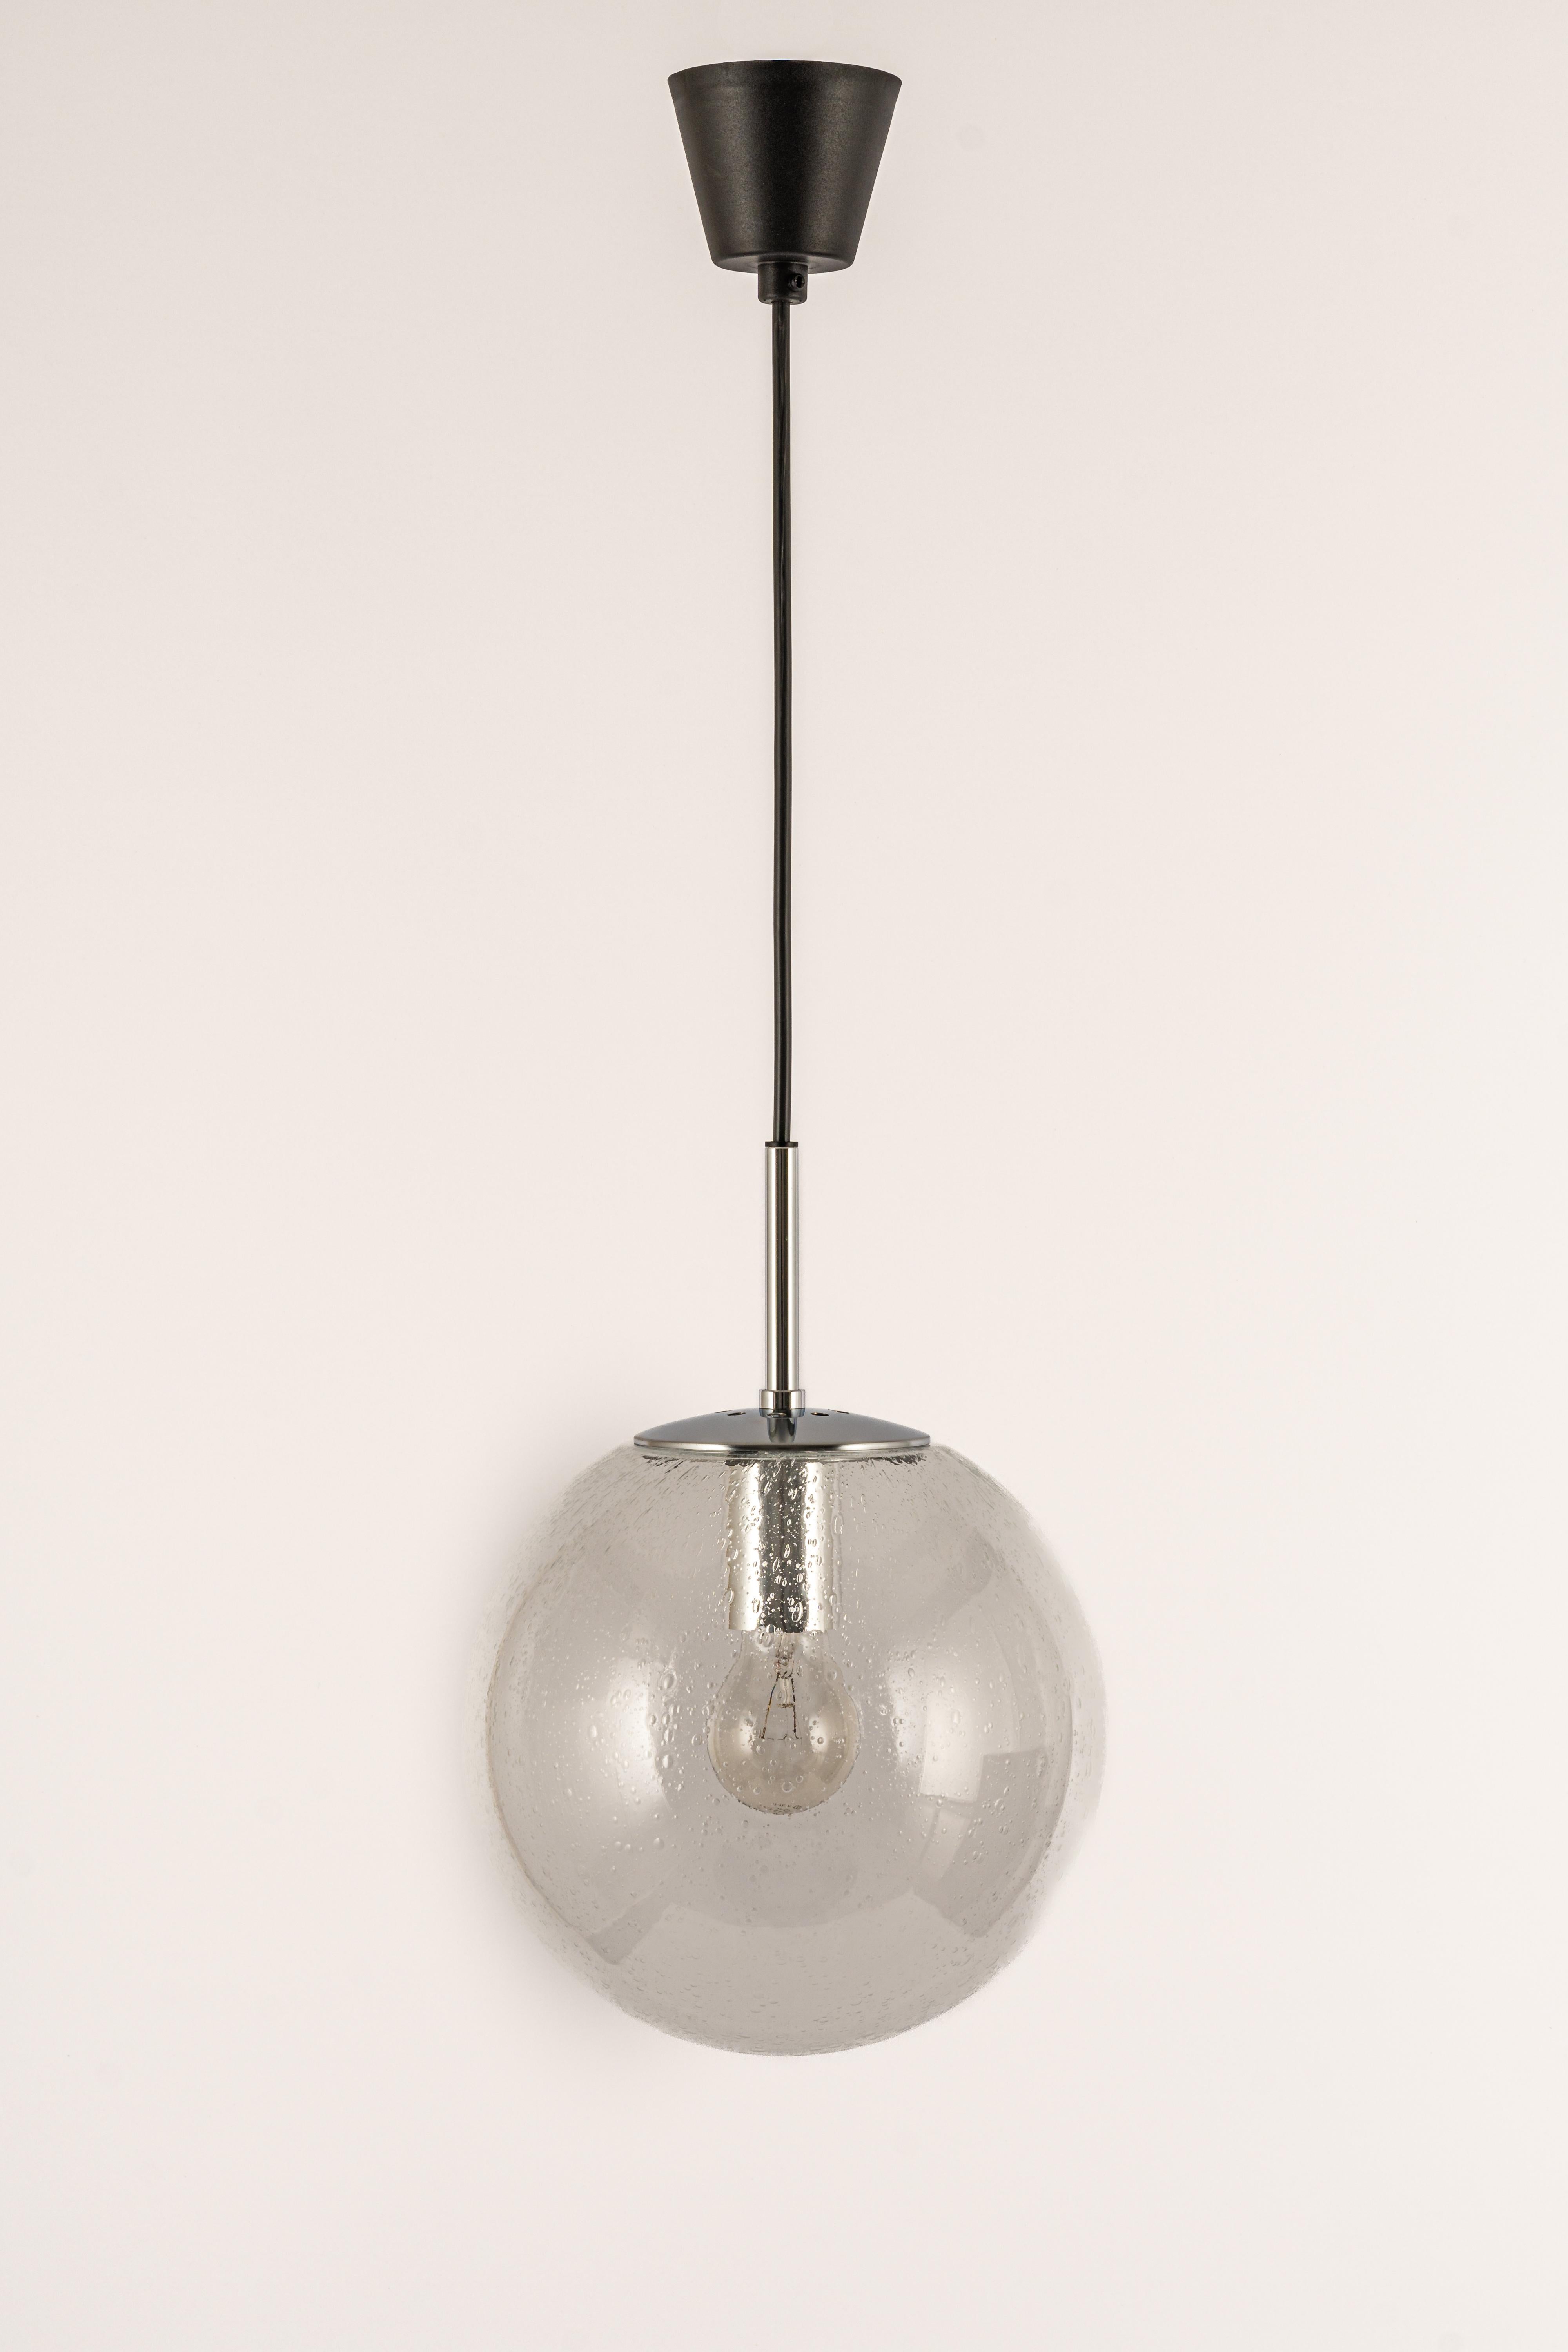 Petite clear glass ball (hand-made) pendant, manufactured by Limburg, Germany, circa 1970-1979.

Sockets: 1 x E27 standard bulbs.
Light bulbs are not included. It is possible to install this fixture in all countries (US, UK, Europe, Asia,